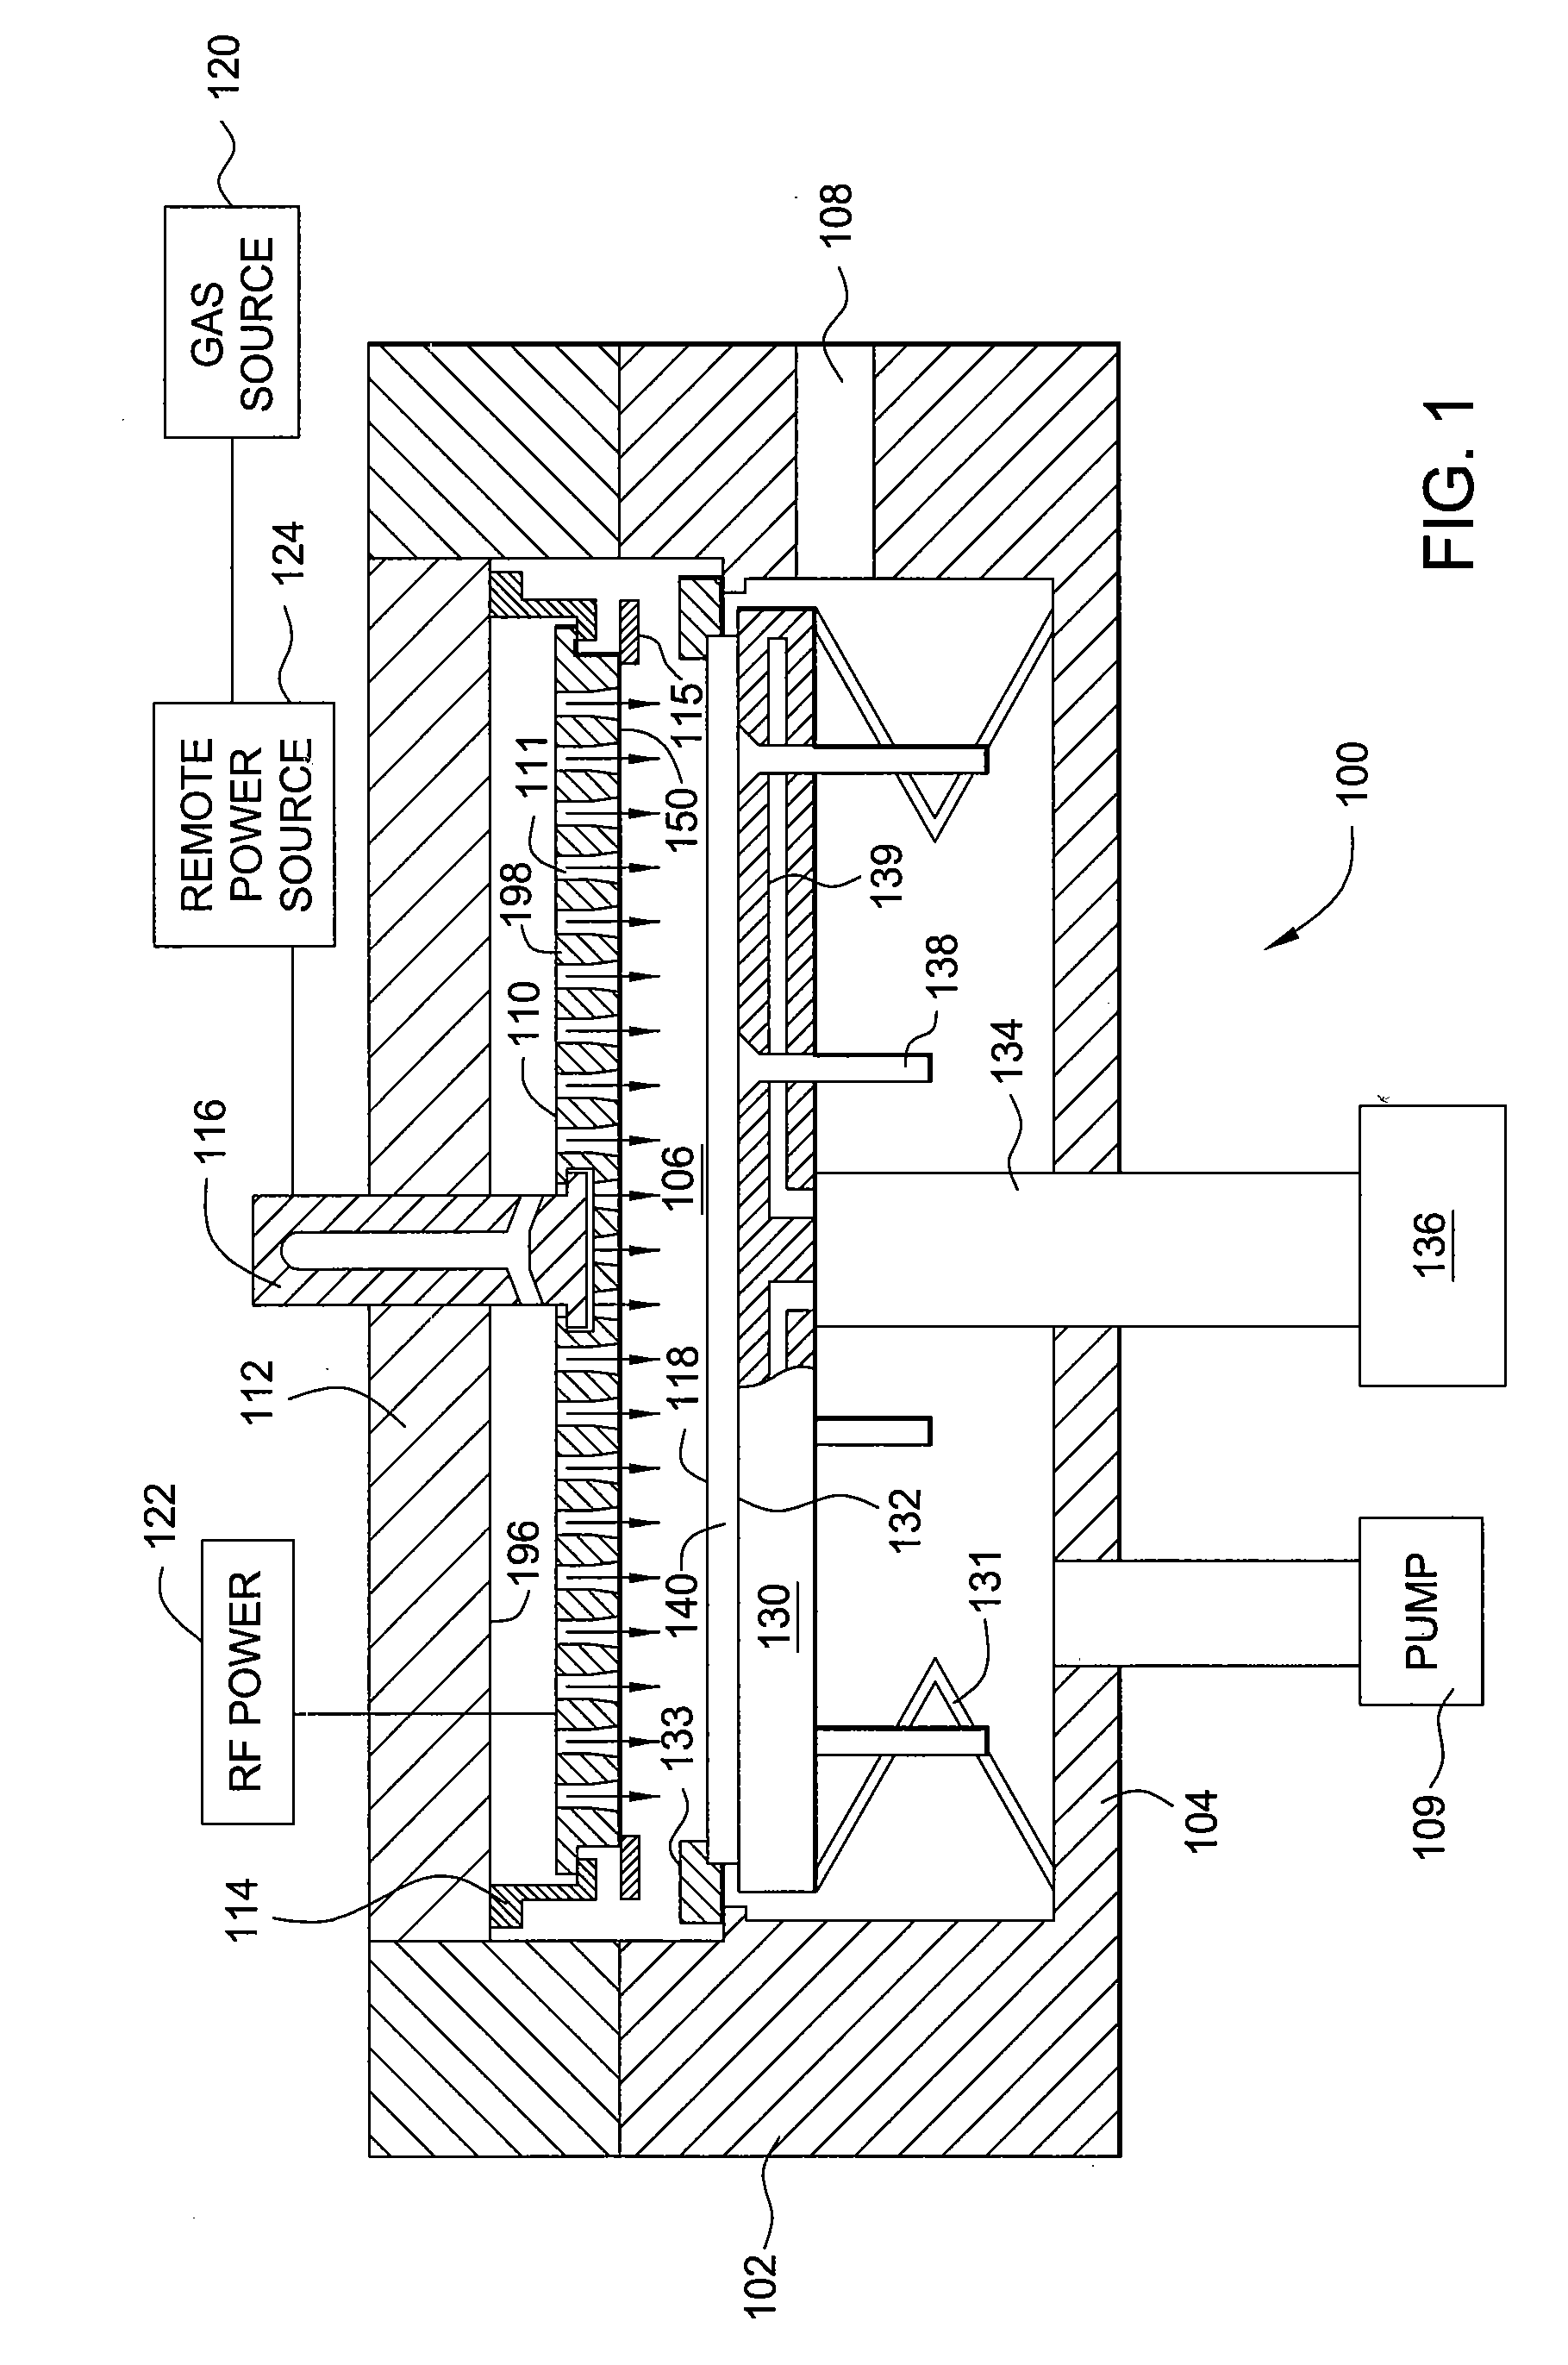 Methods and apparatus for depositing a uniform silicon film with flow gradient designs